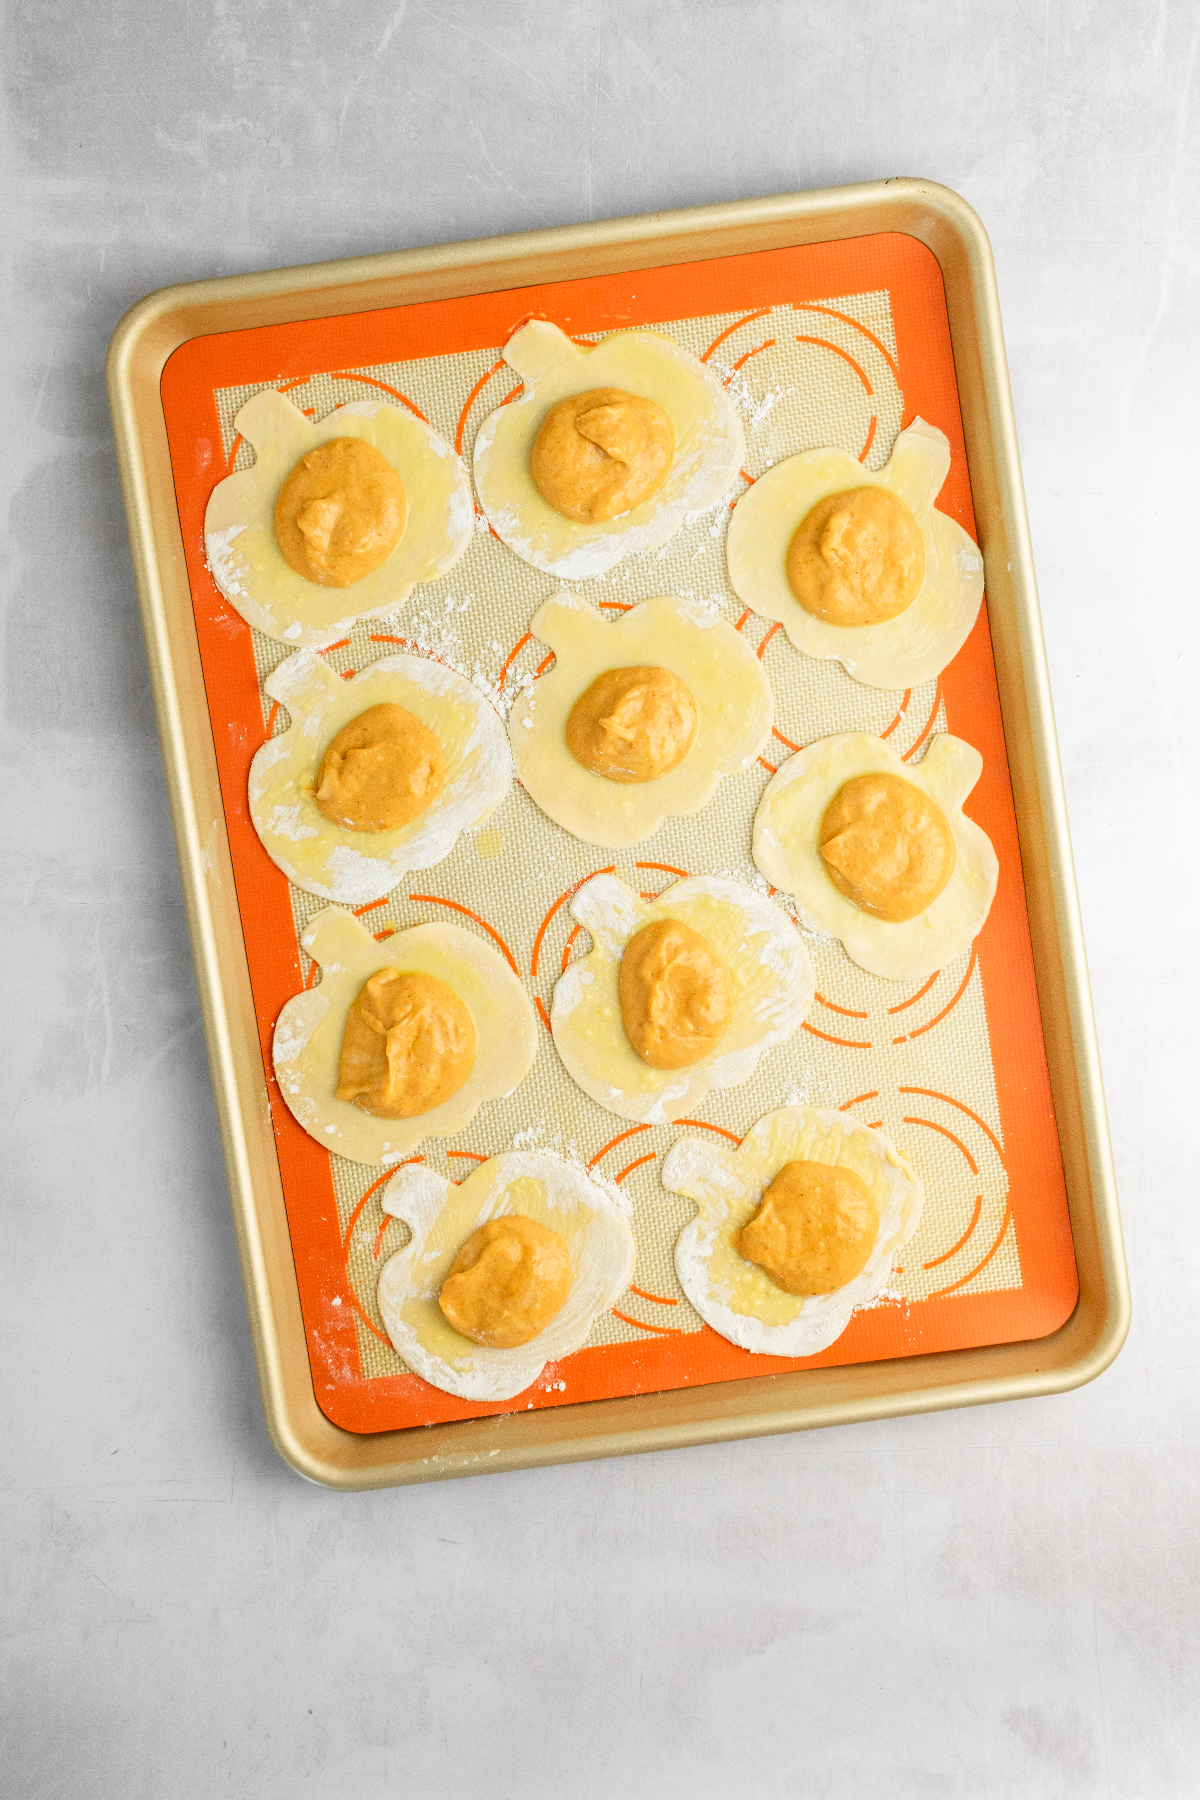 Baking sheet with 10 pumpkin pie doughs with filling.